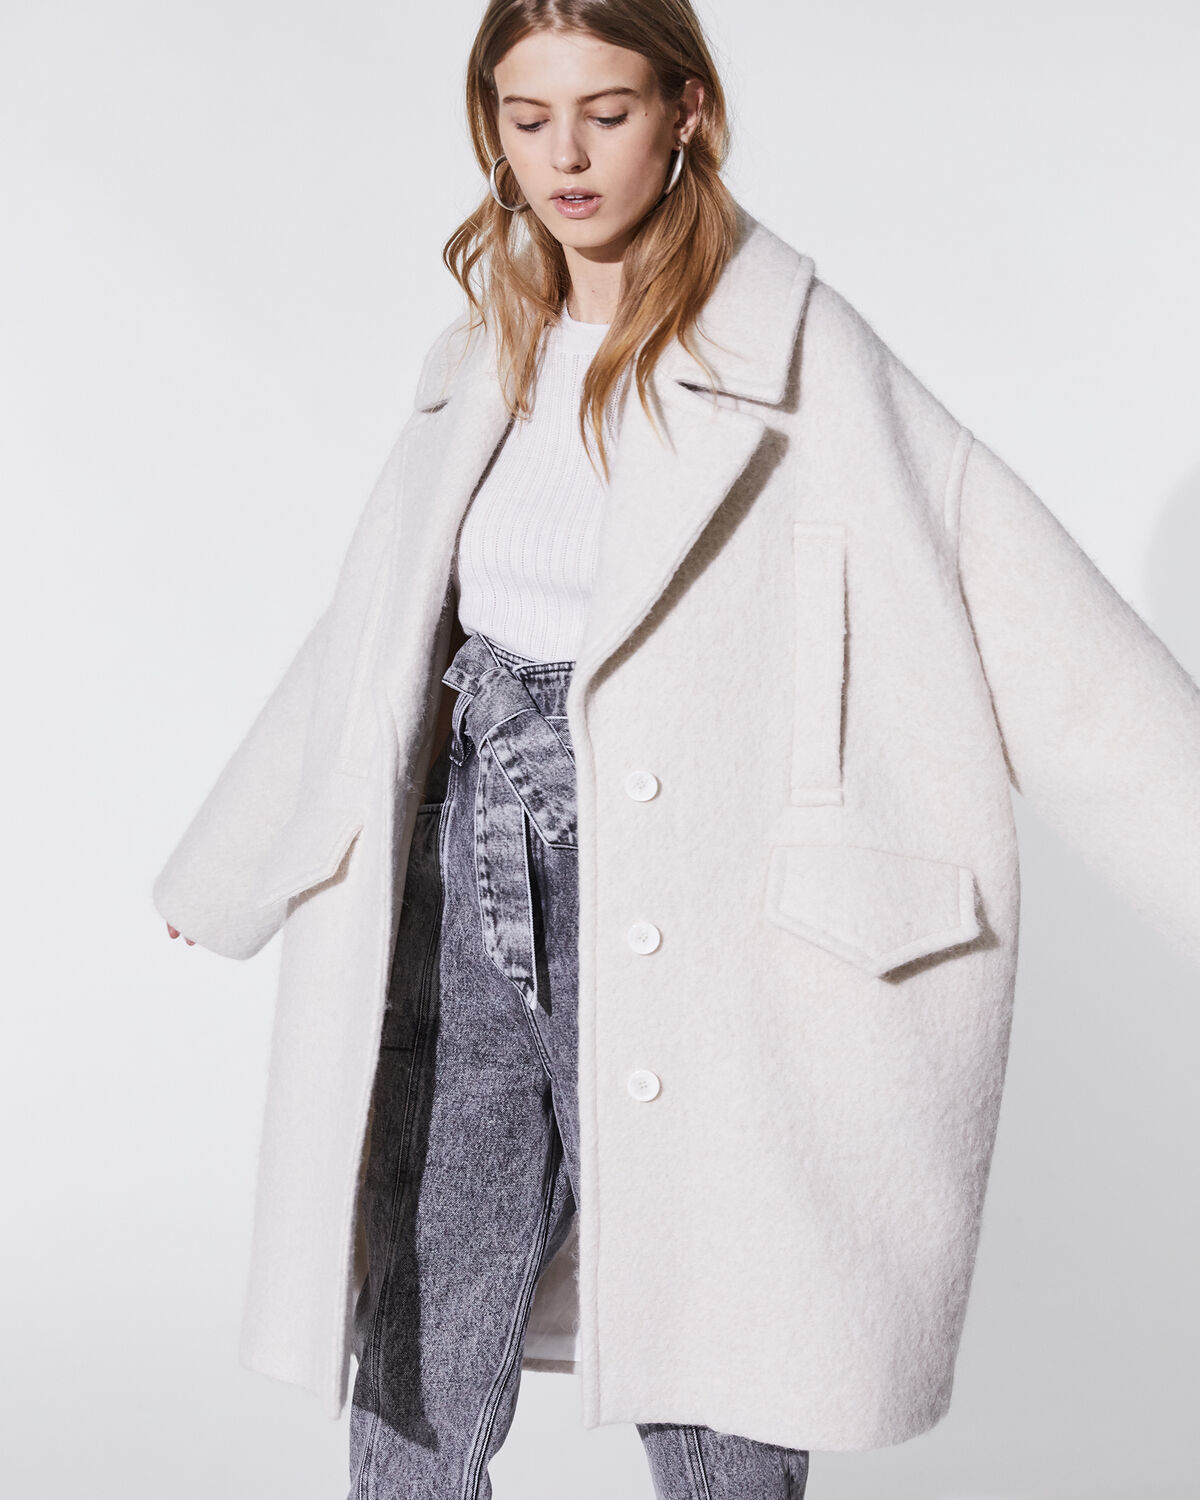 Photo of IRO Paris Berlioz Coat Ecru - This Jacket Is Distinguished By Its Large Flap Pockets And Piped Pockets. Made From Virgin Wool, Mohair And Alpaca, It Can Be Worn Oversized For A Chic Casual Look. Fall Winter 19